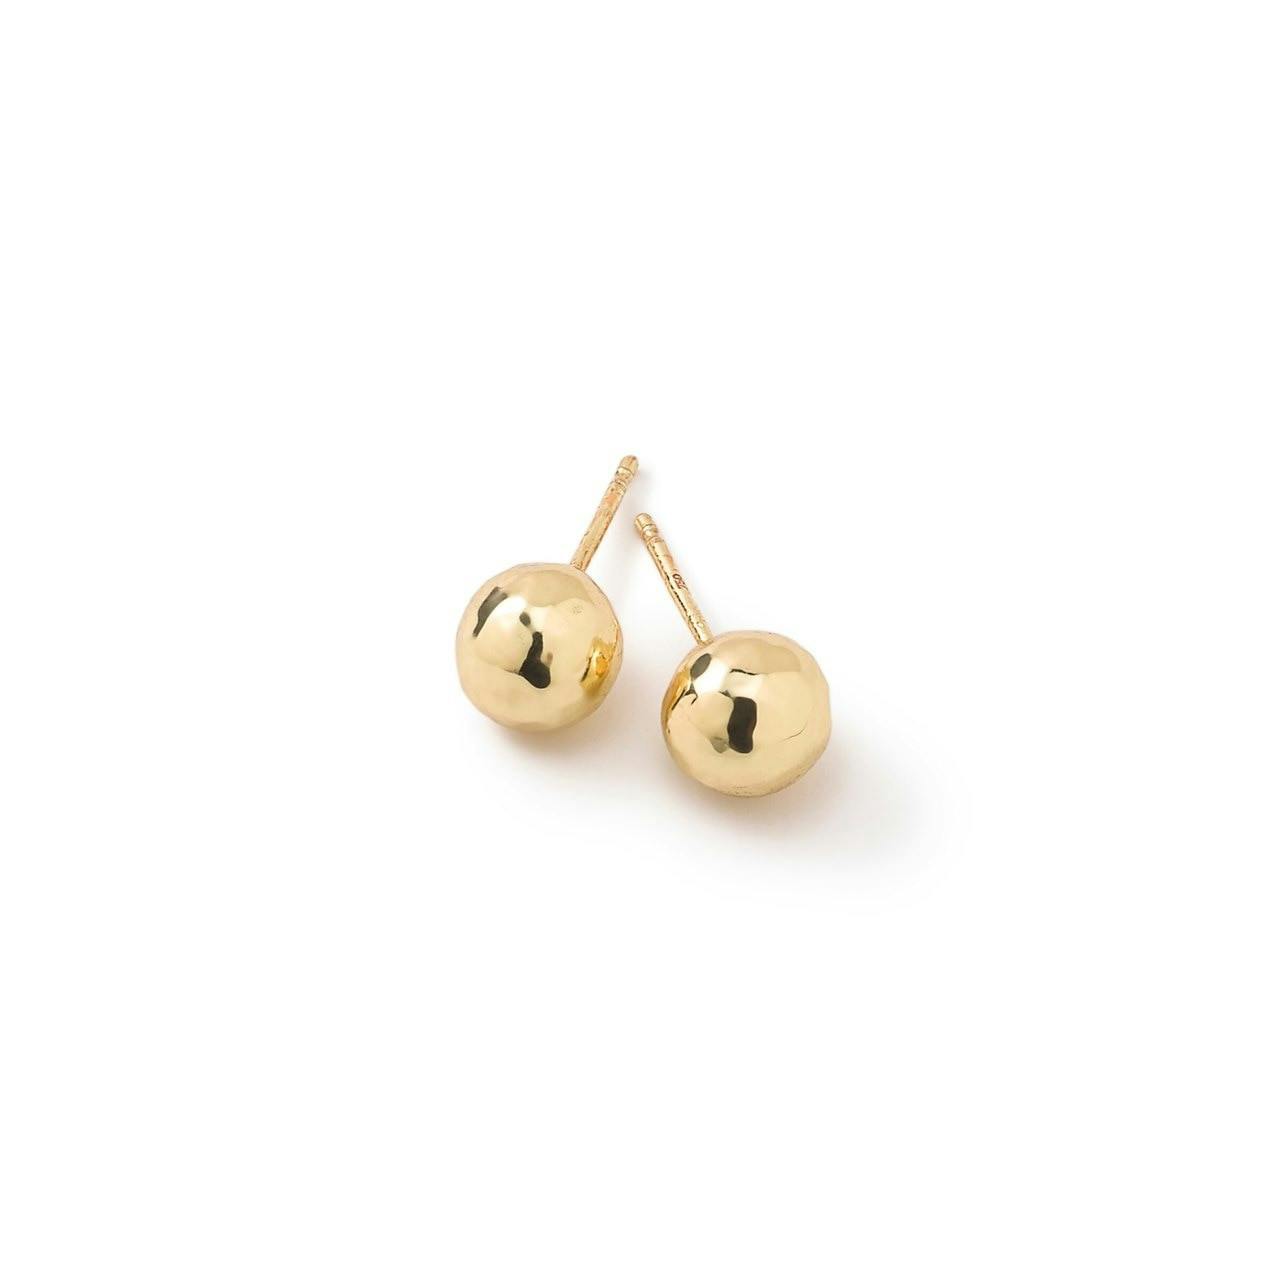 Ippolita Classico Small Hammered Ball Earrings in 18k Yellow Gold 0